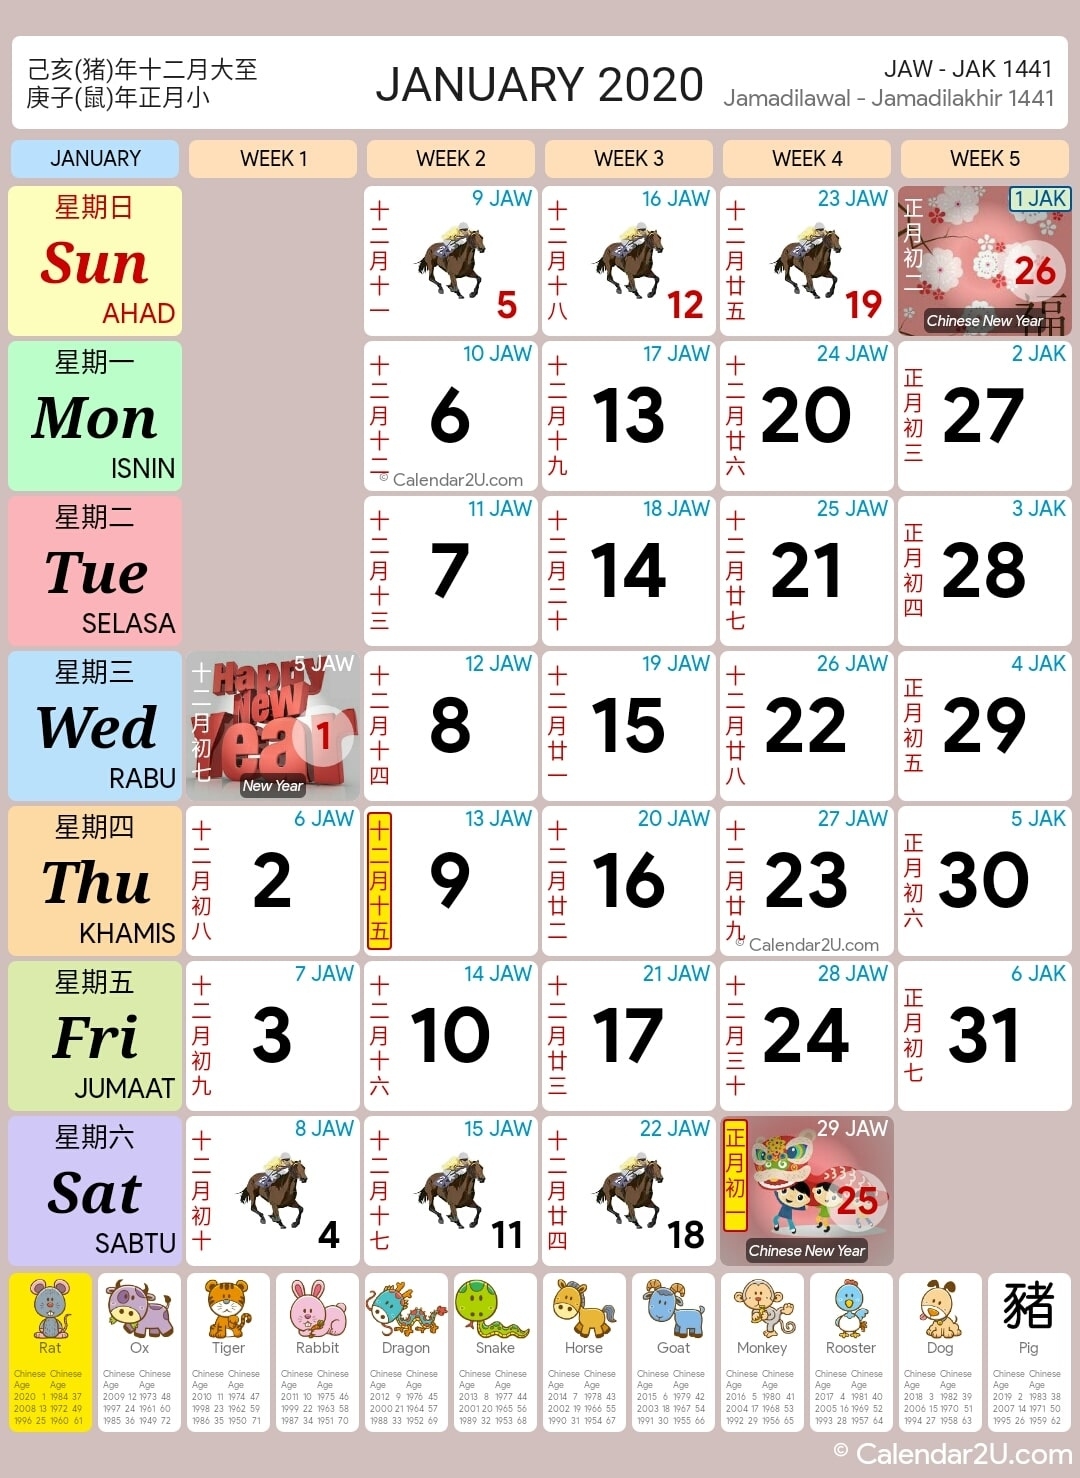 Singapore Calendar Year 2020 - Singapore Calendar 2020 Calender With Luner Dates